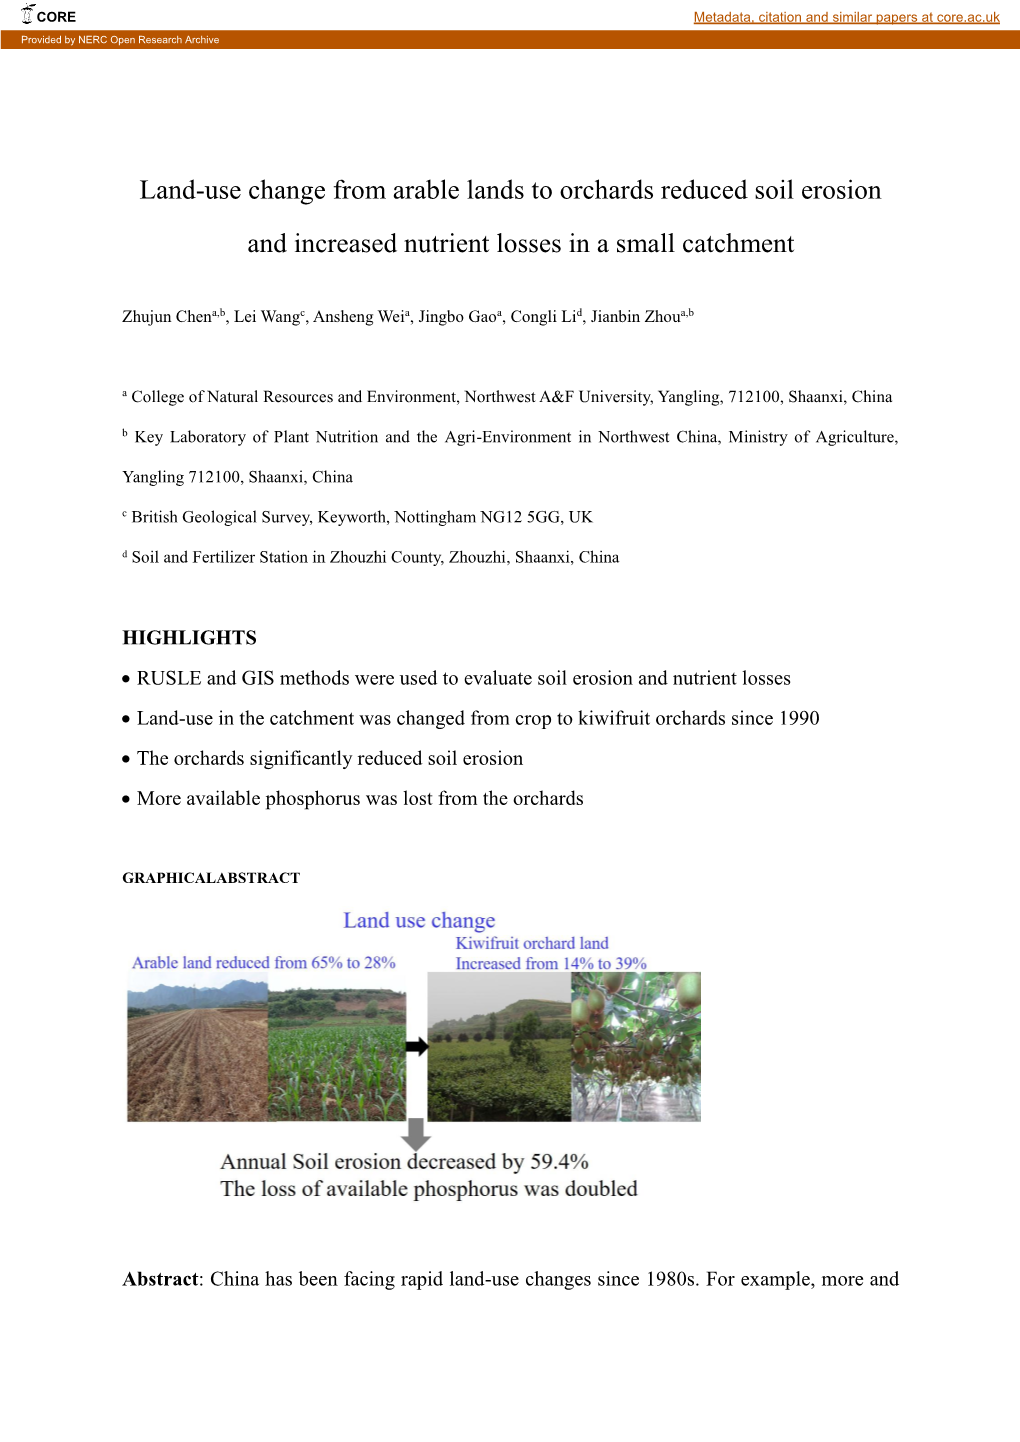 Land-Use Change from Arable Lands to Orchards Reduced Soil Erosion and Increased Nutrient Losses in a Small Catchment